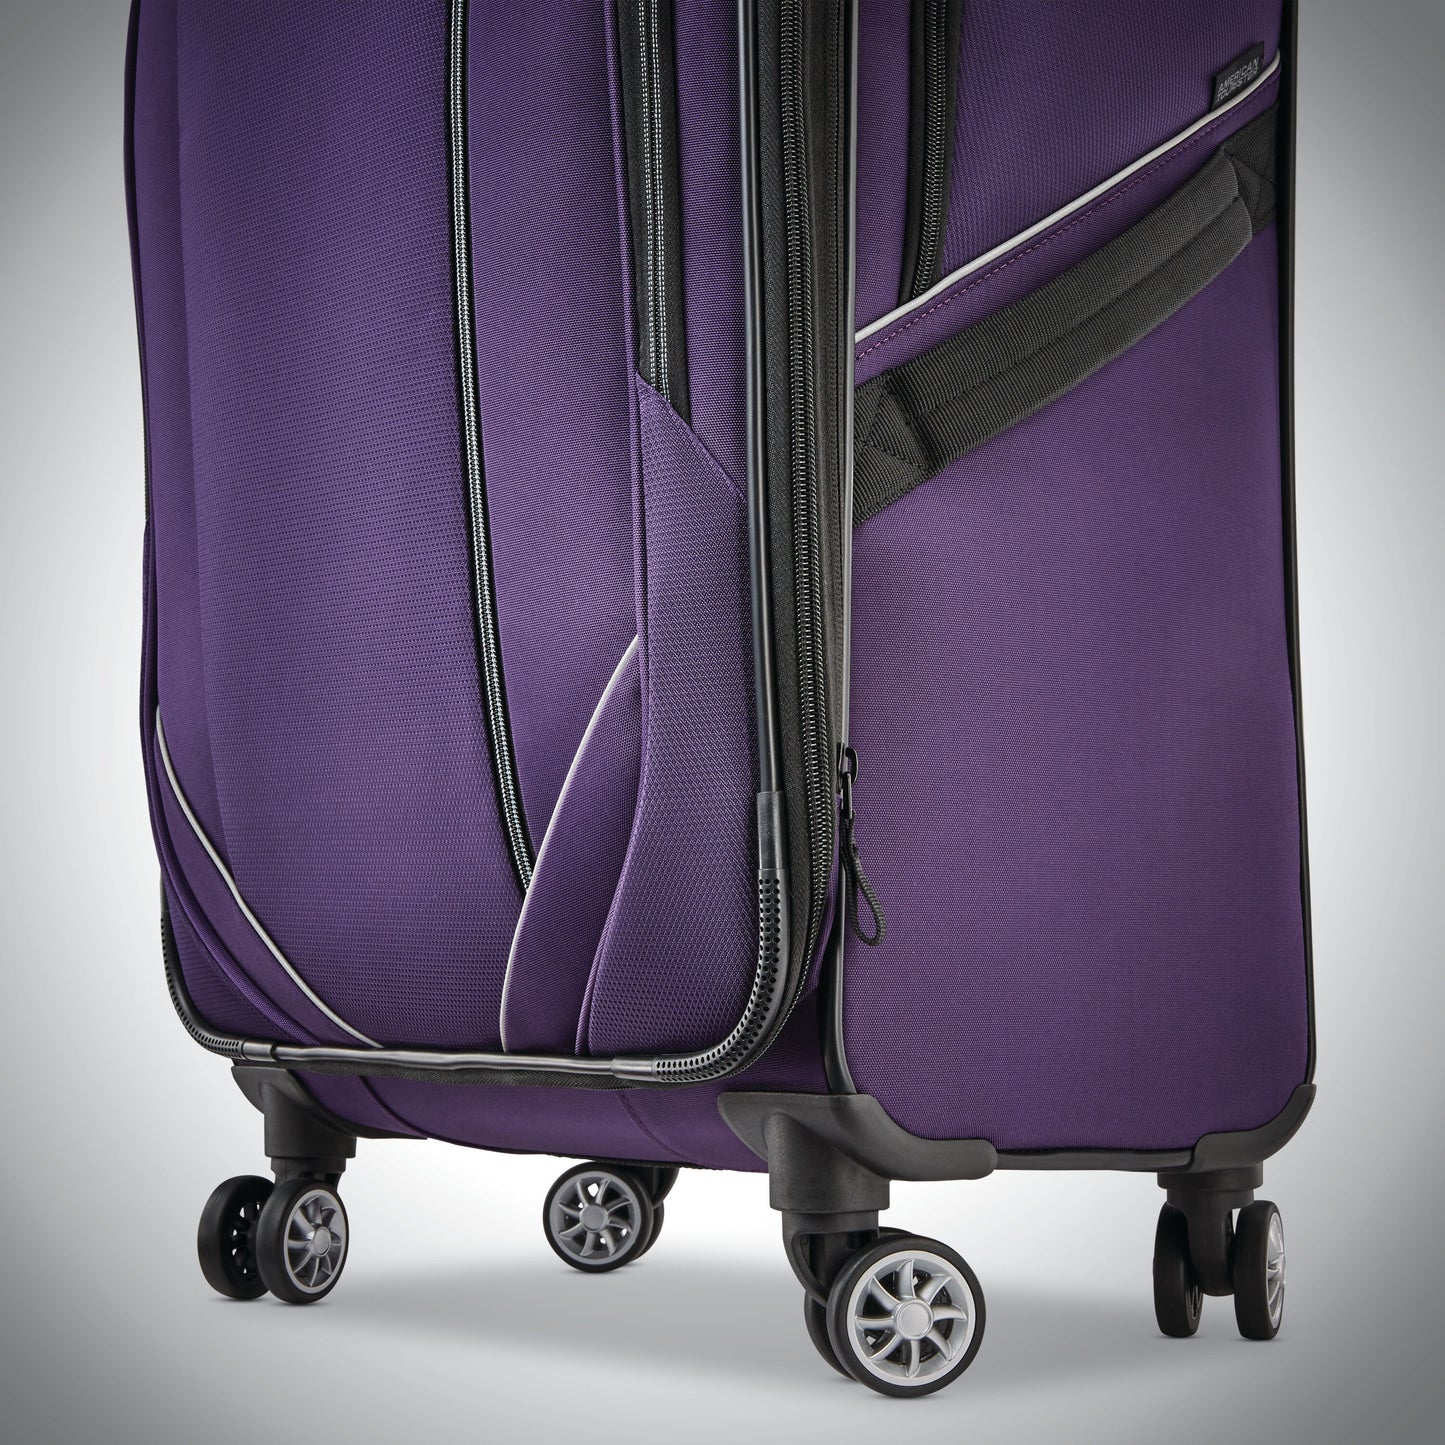 American Tourister Zoom Turbo 28" Spinner